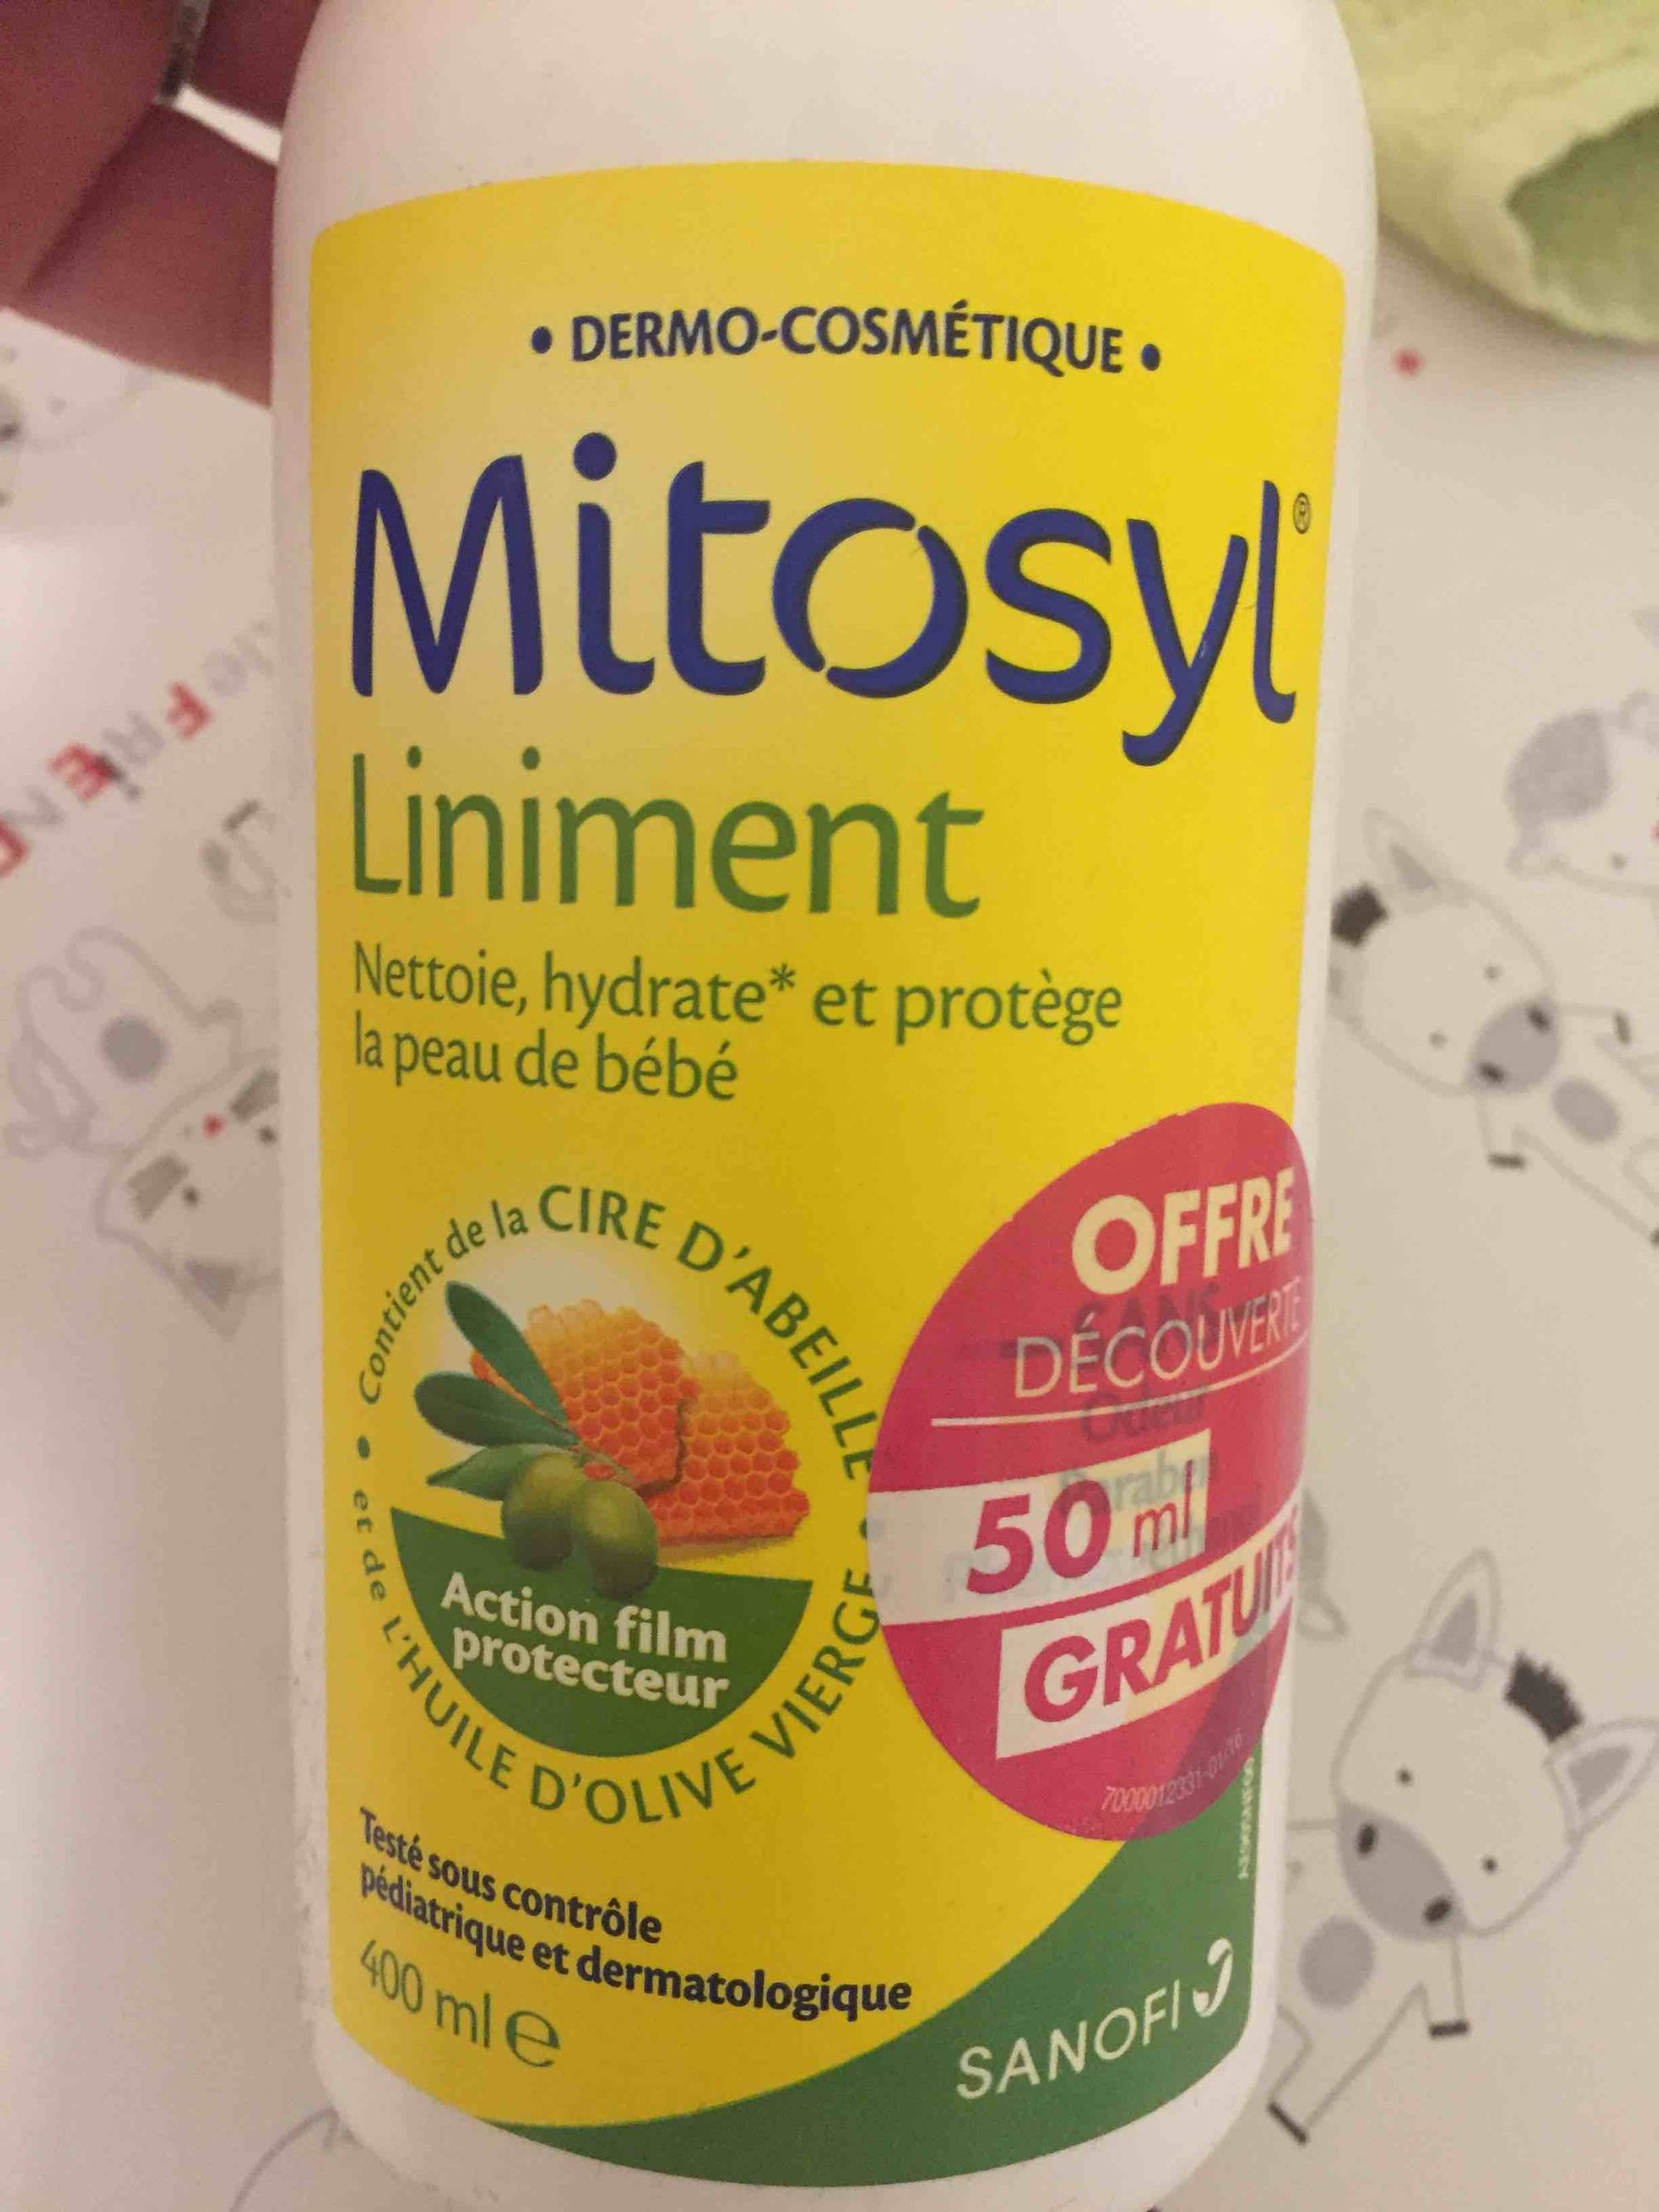 Composition MITOSYL Change - Pommade protectrice - UFC-Que Choisir